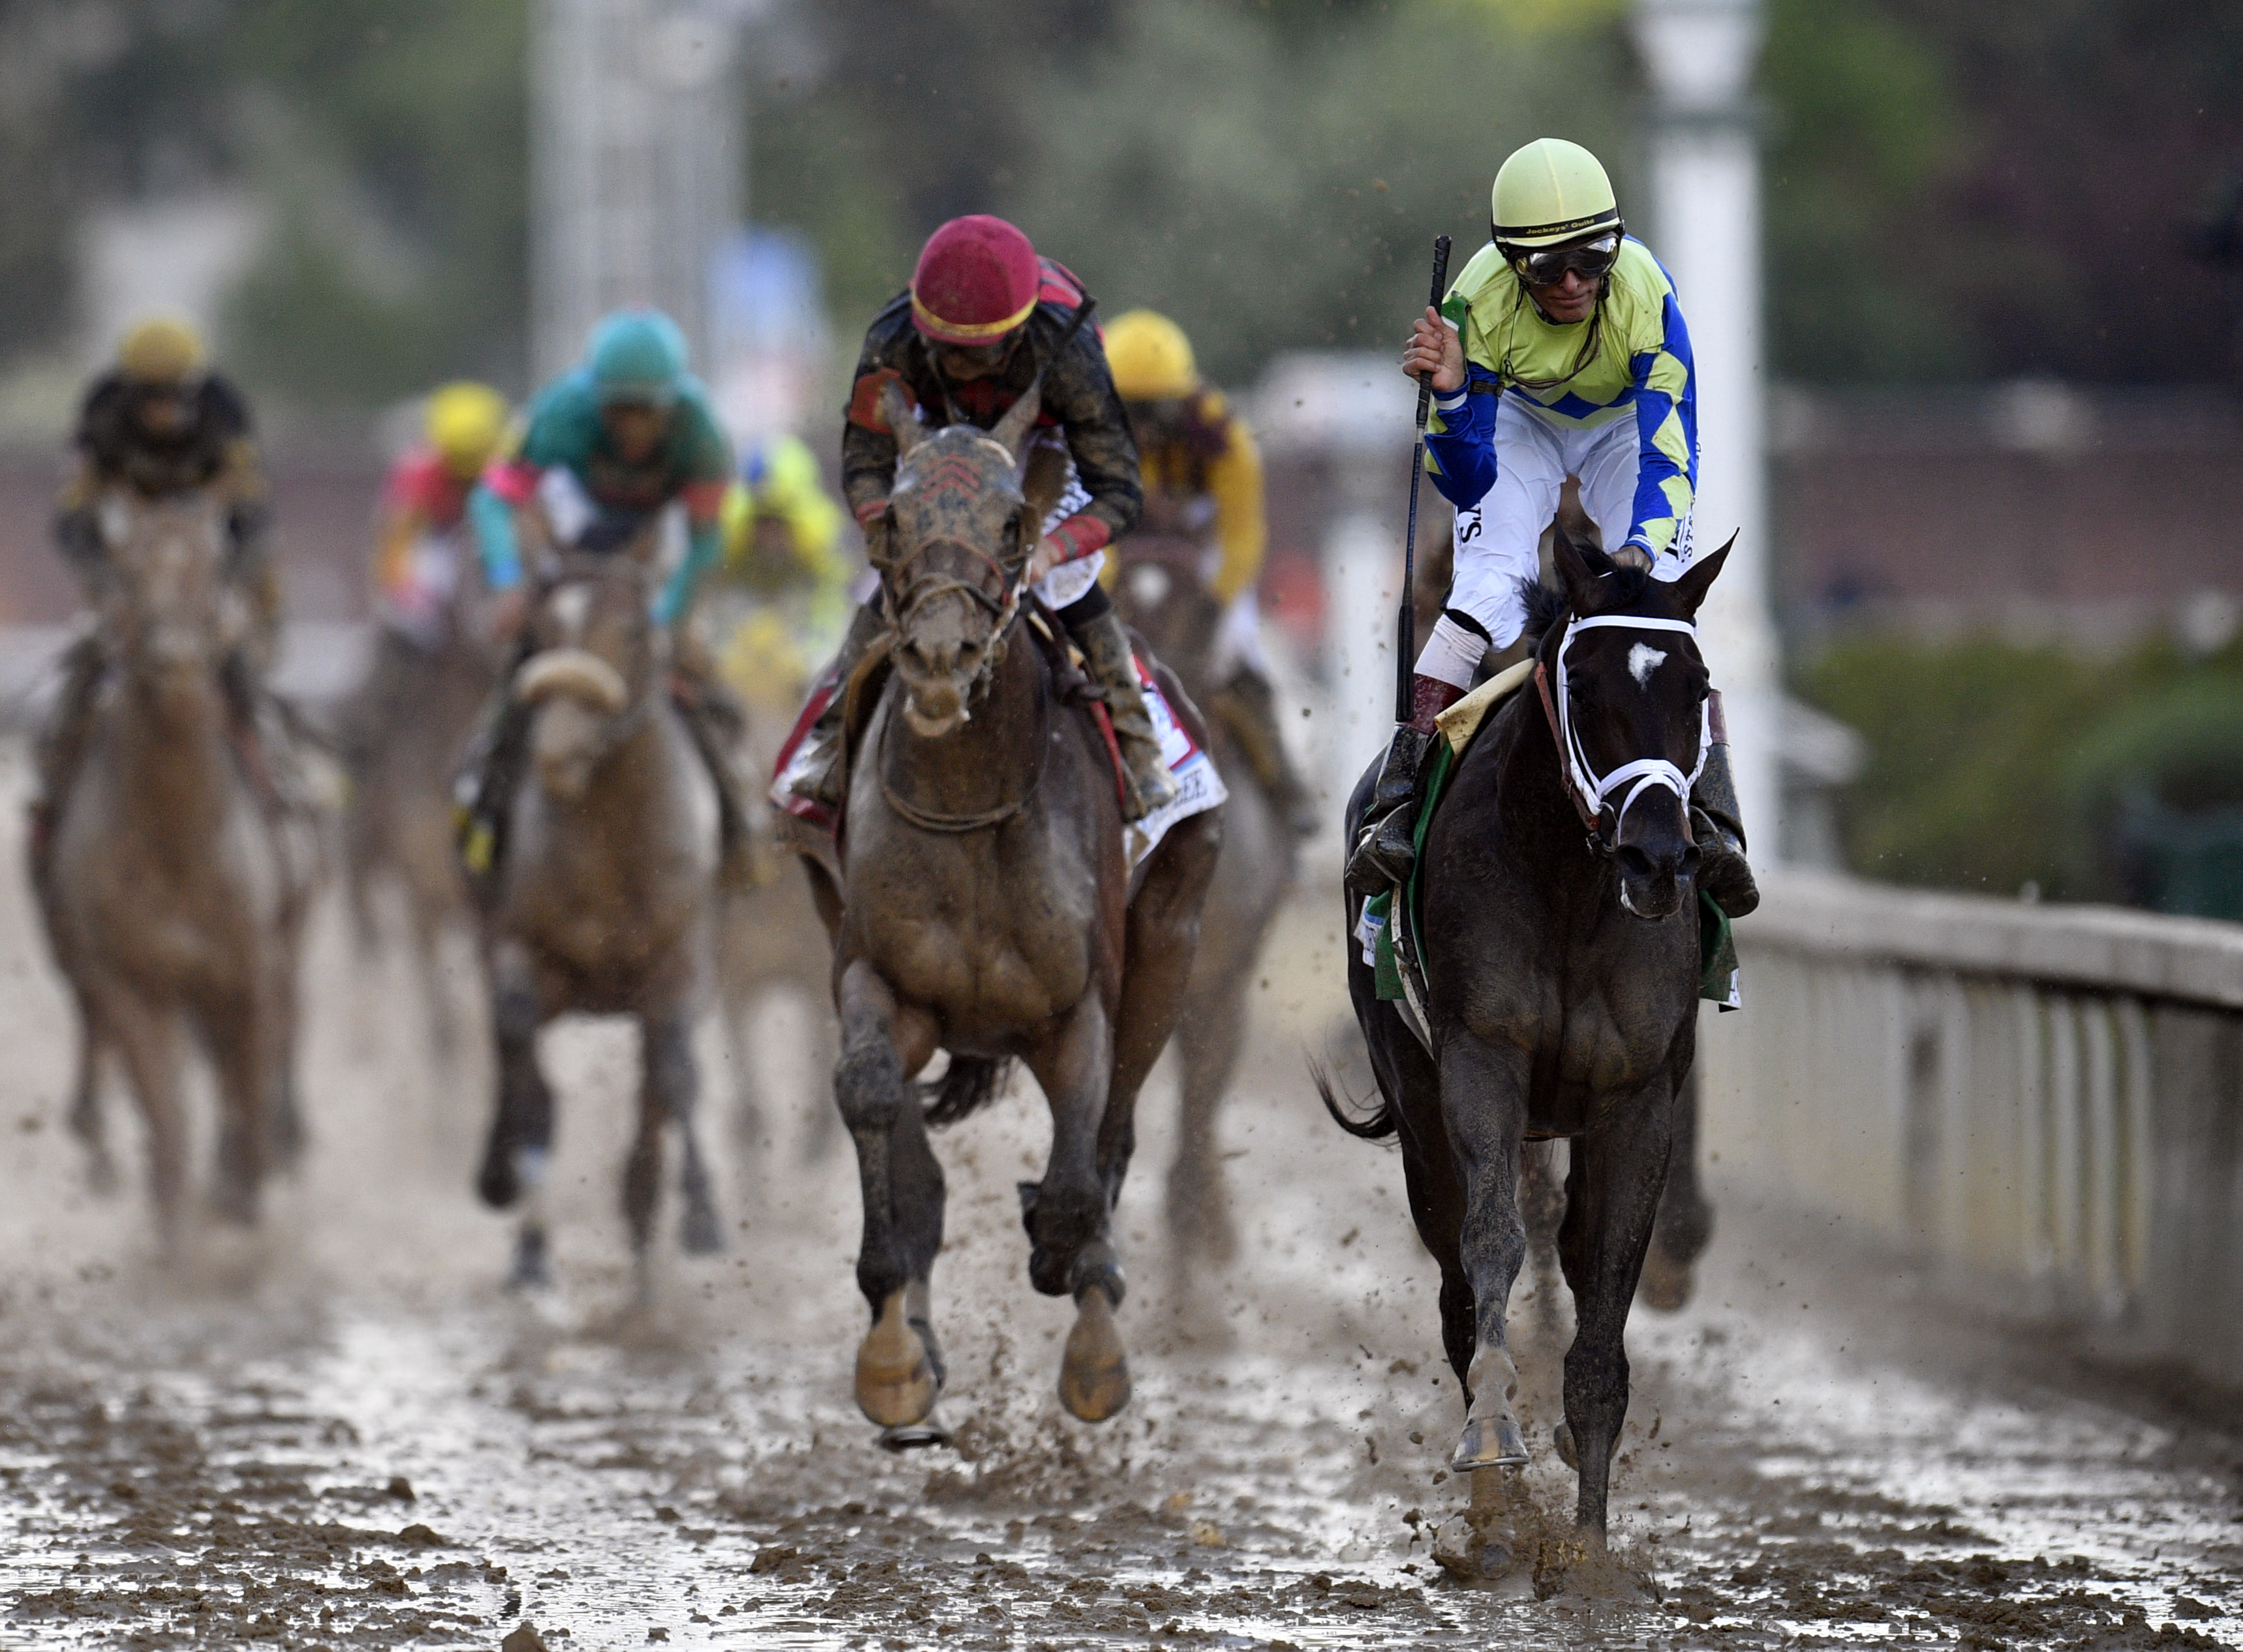 Derby / After Justifying the Hype, Can Justify Win Kentucky Derby